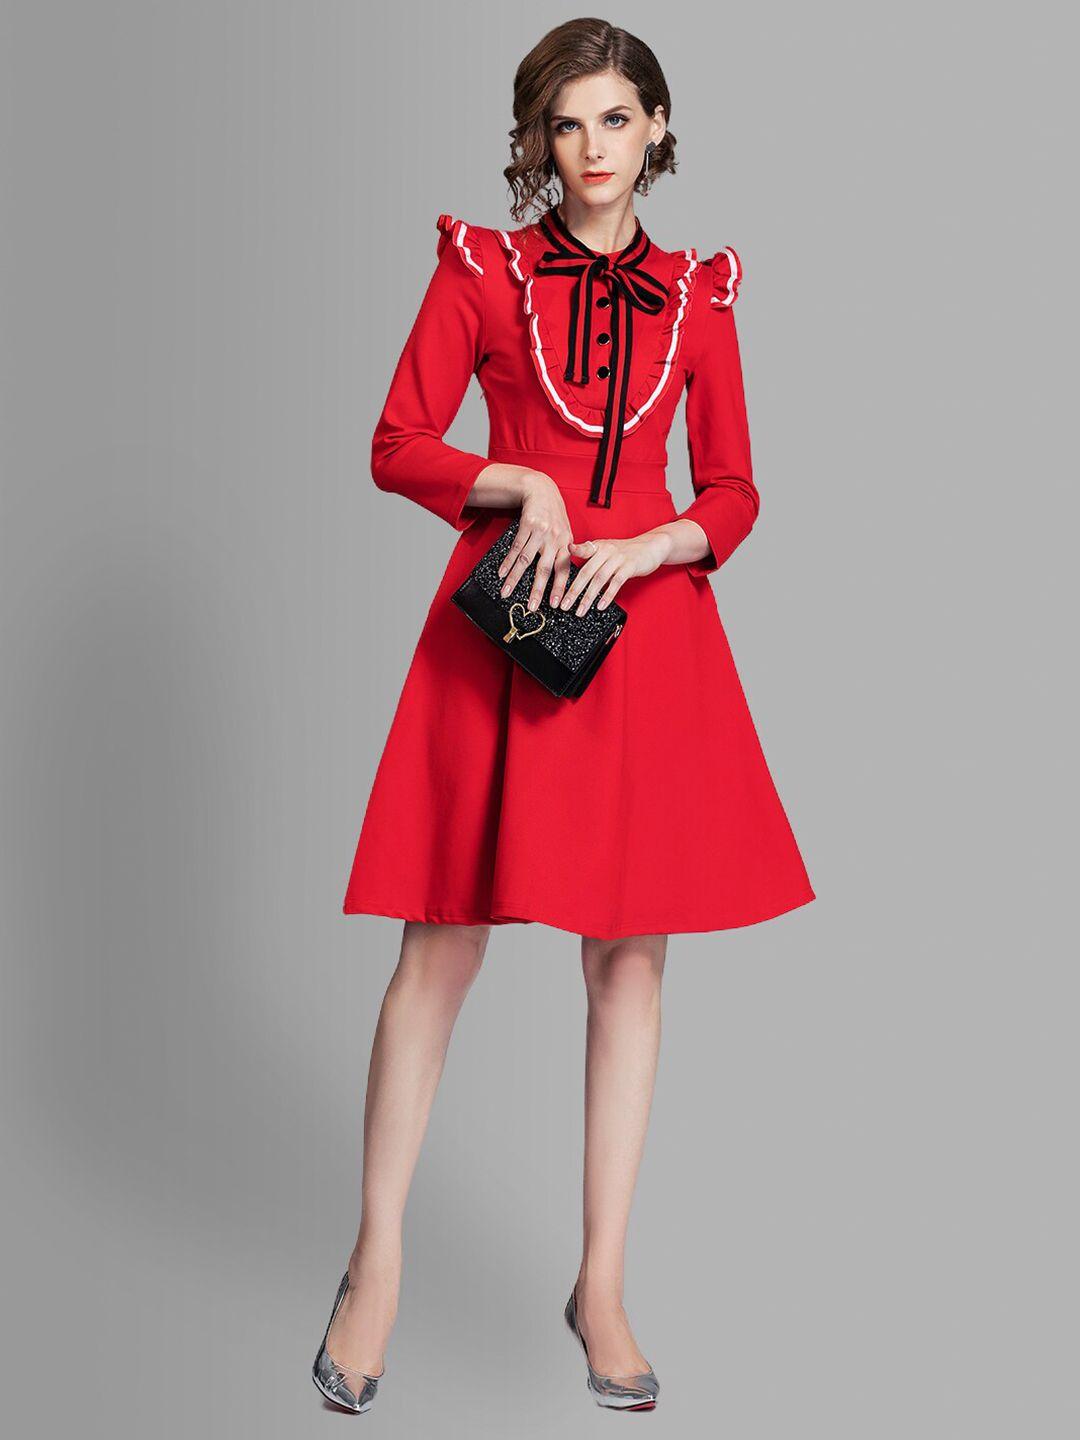 jc collection women red tie-up ruffled neck dress